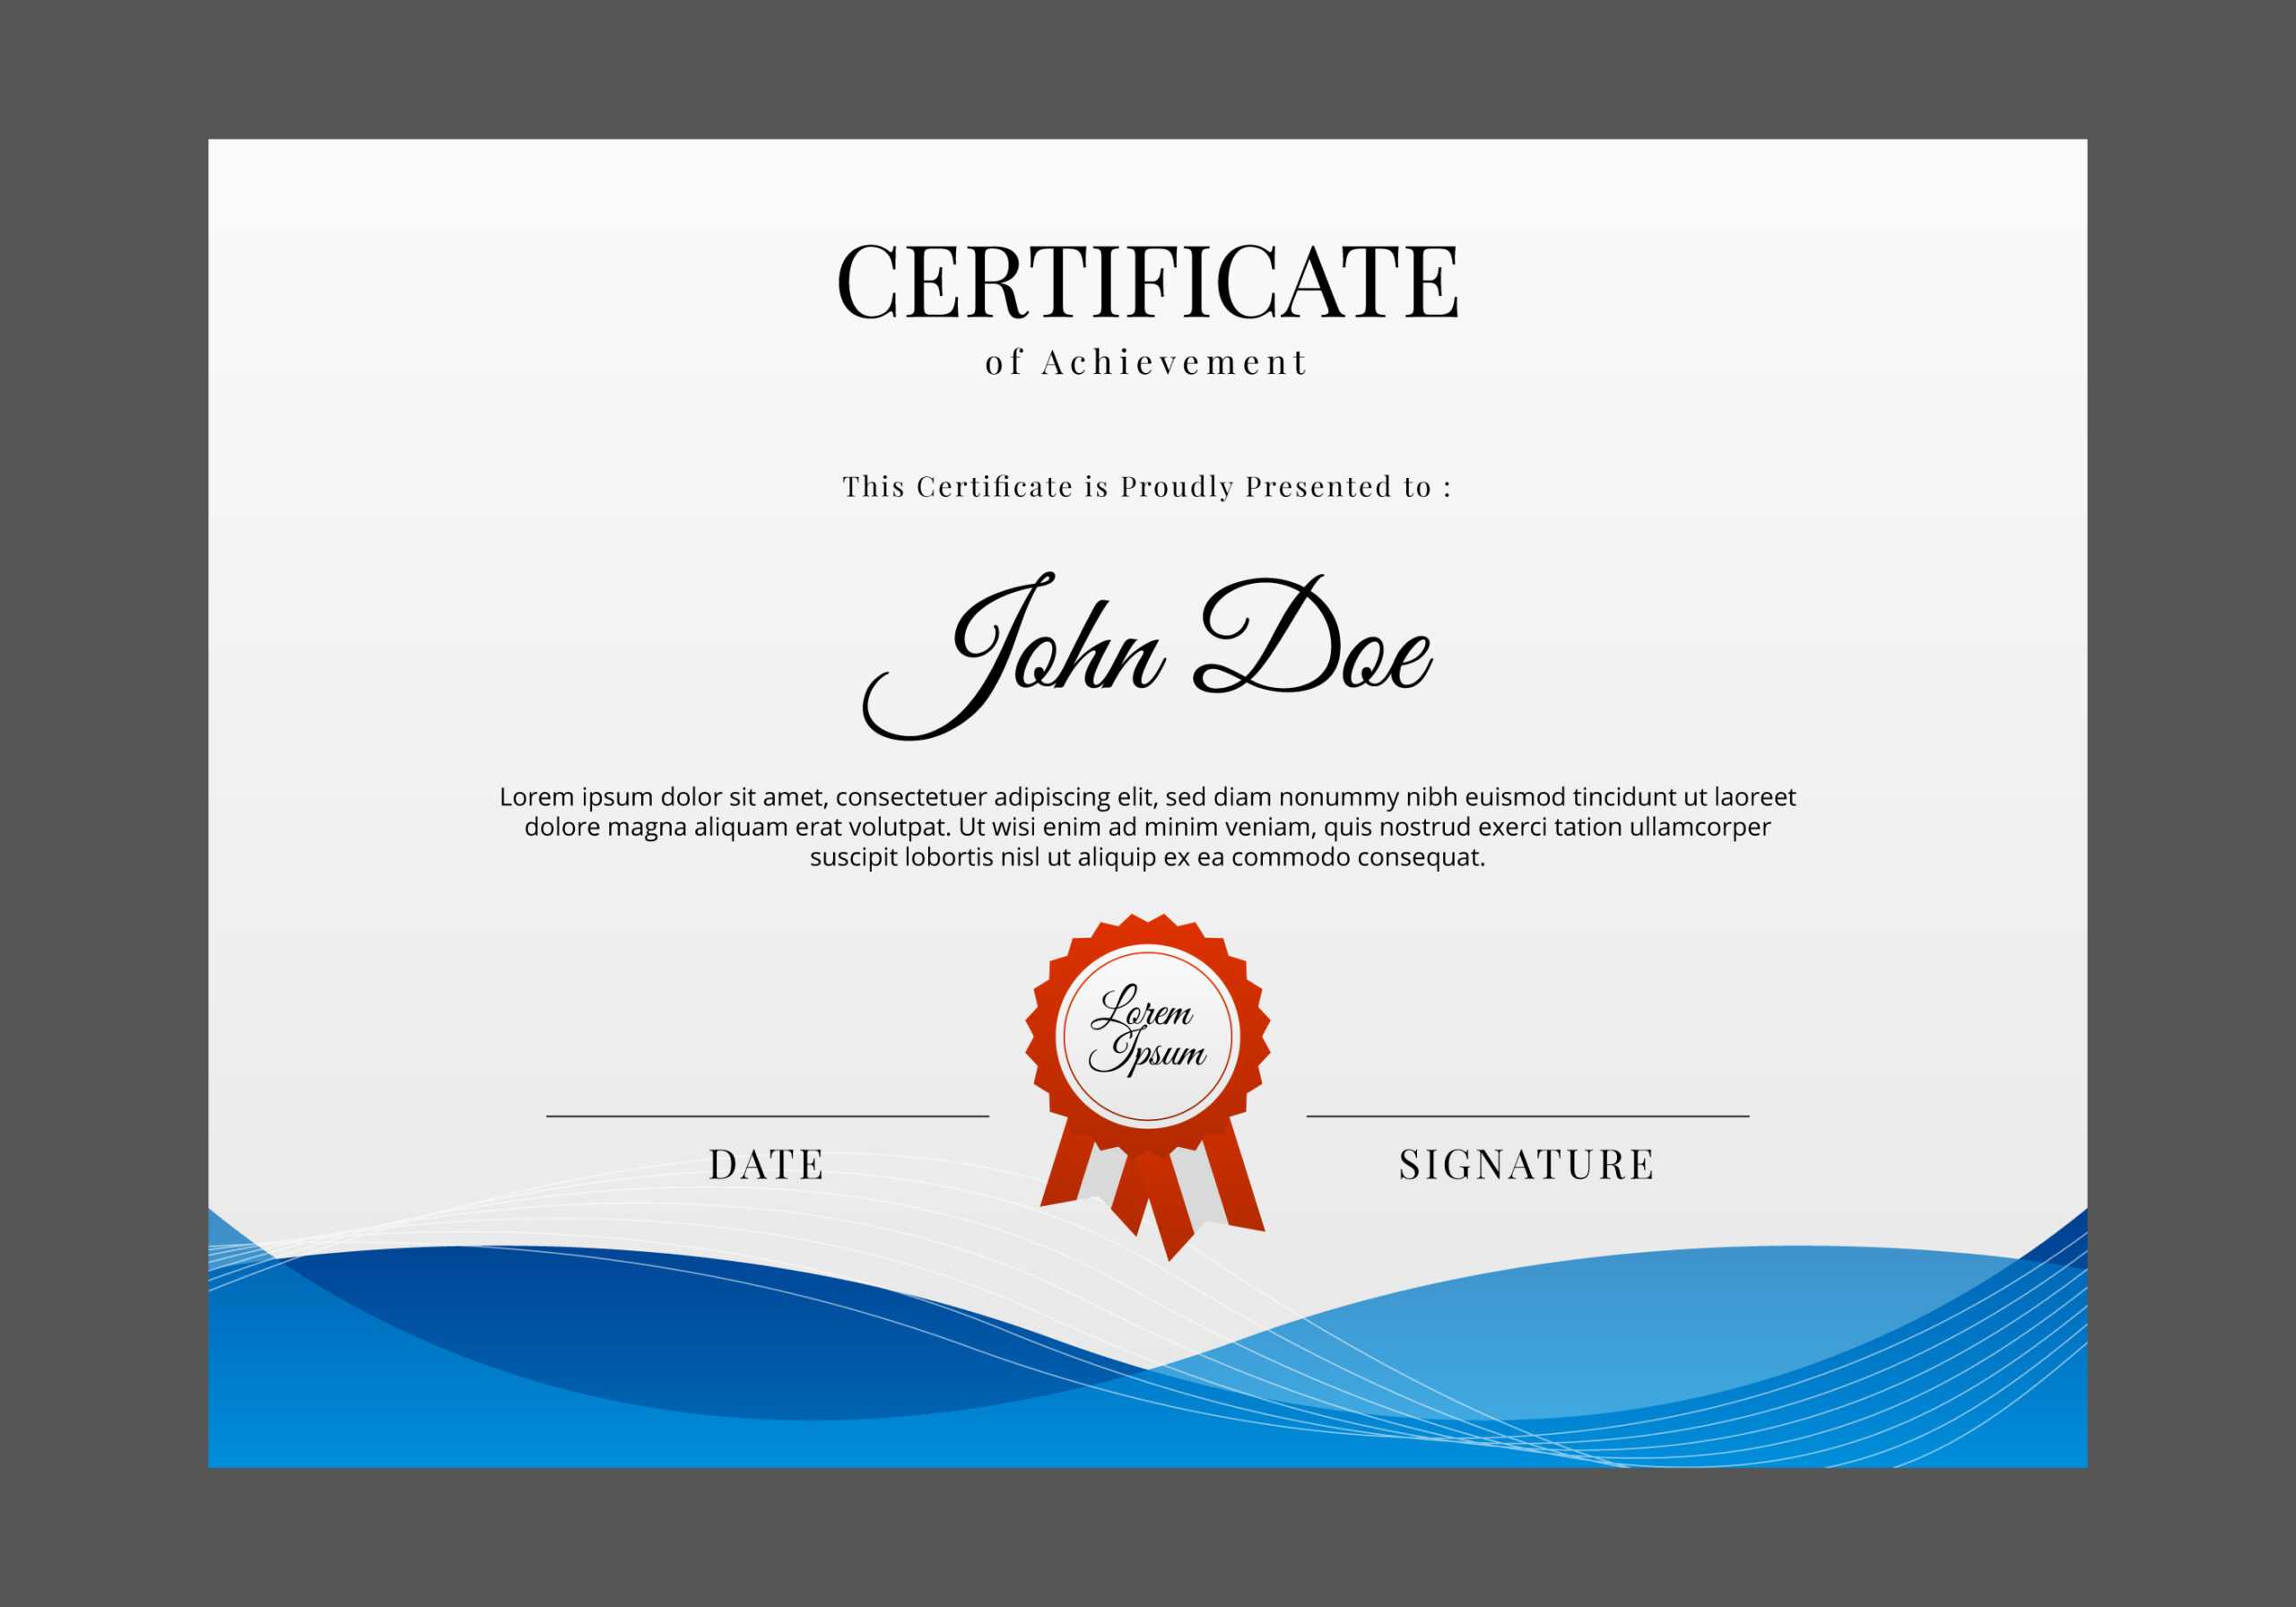 Certificate Templates, Free Certificate Designs Inside Professional Certificate Templates For Word